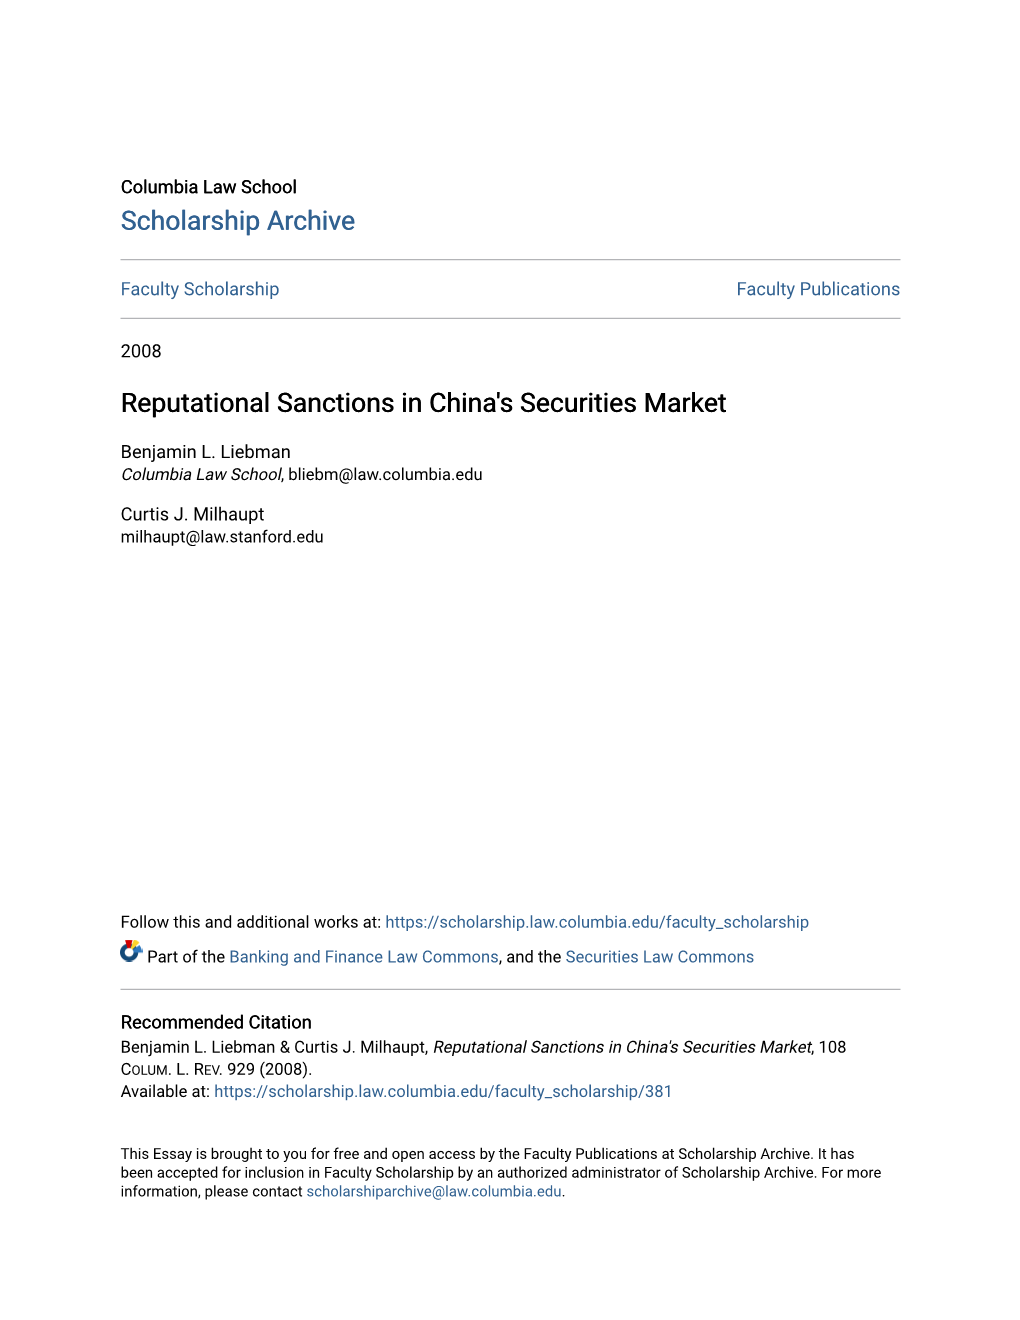 Reputational Sanctions in China's Securities Market